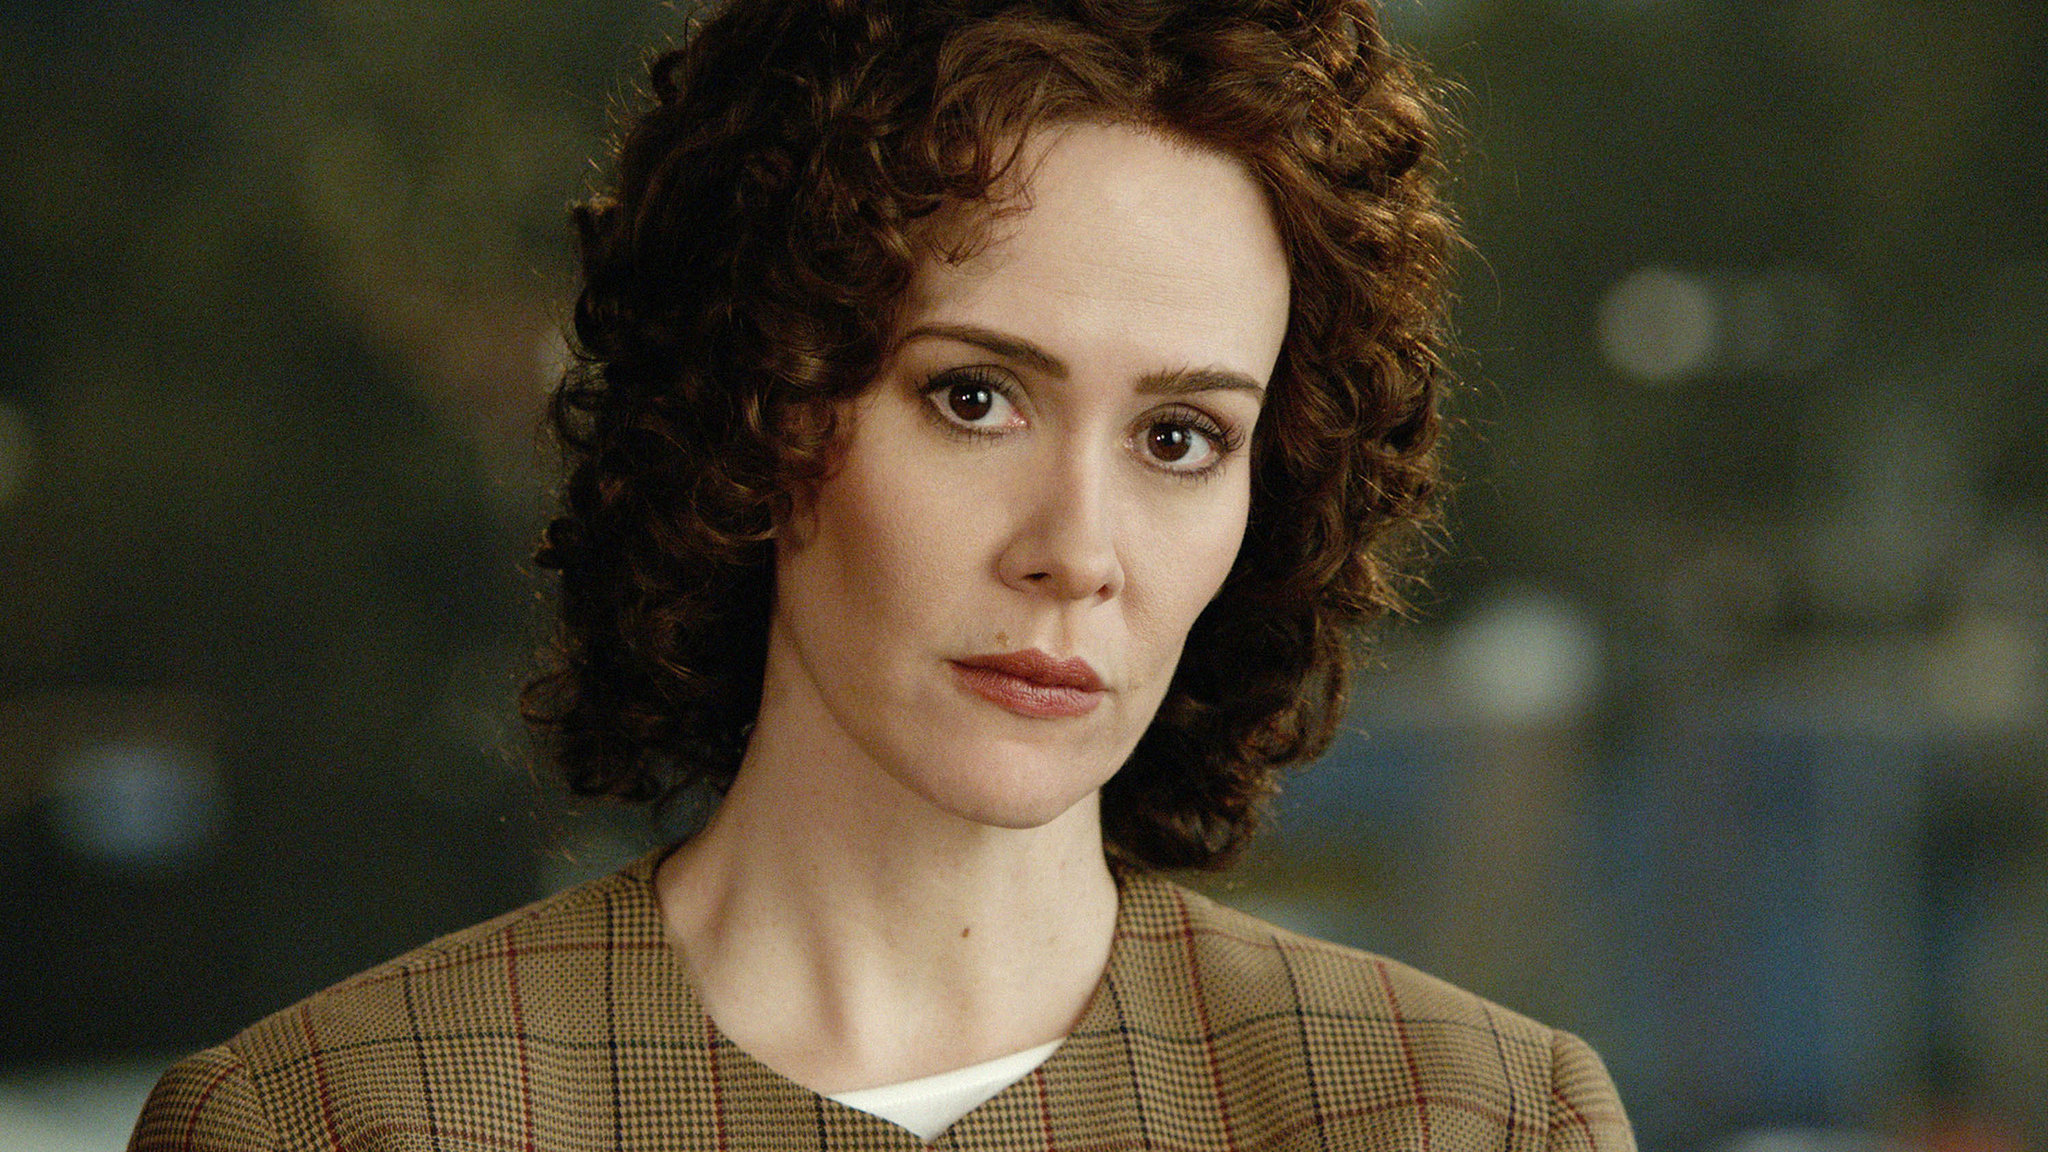 Sarah Paulson As Marcia Clark How Much Does The Cast Of American Crime Story Look Like Their